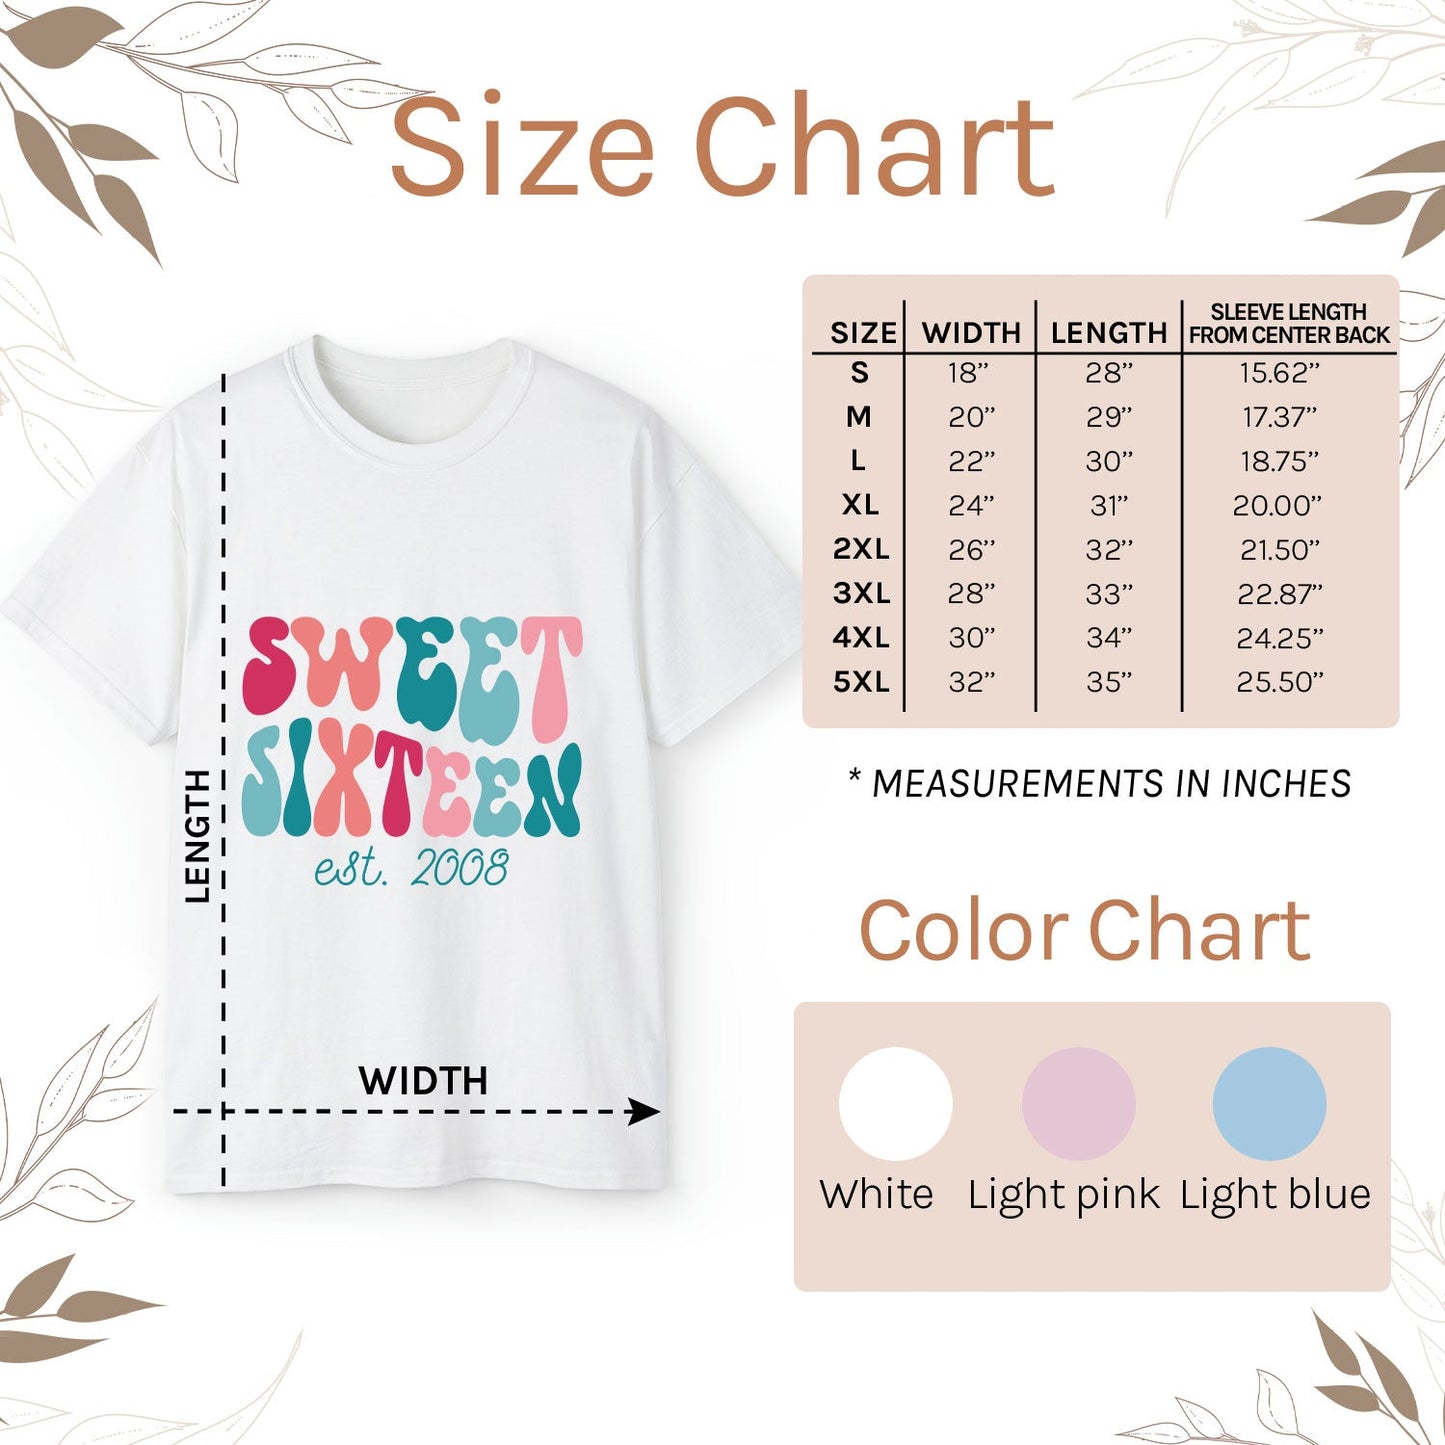 Sweet Sixteen - Personalized 16th Birthday gift For 16 Year Old - Custom Tshirt - MyMindfulGifts